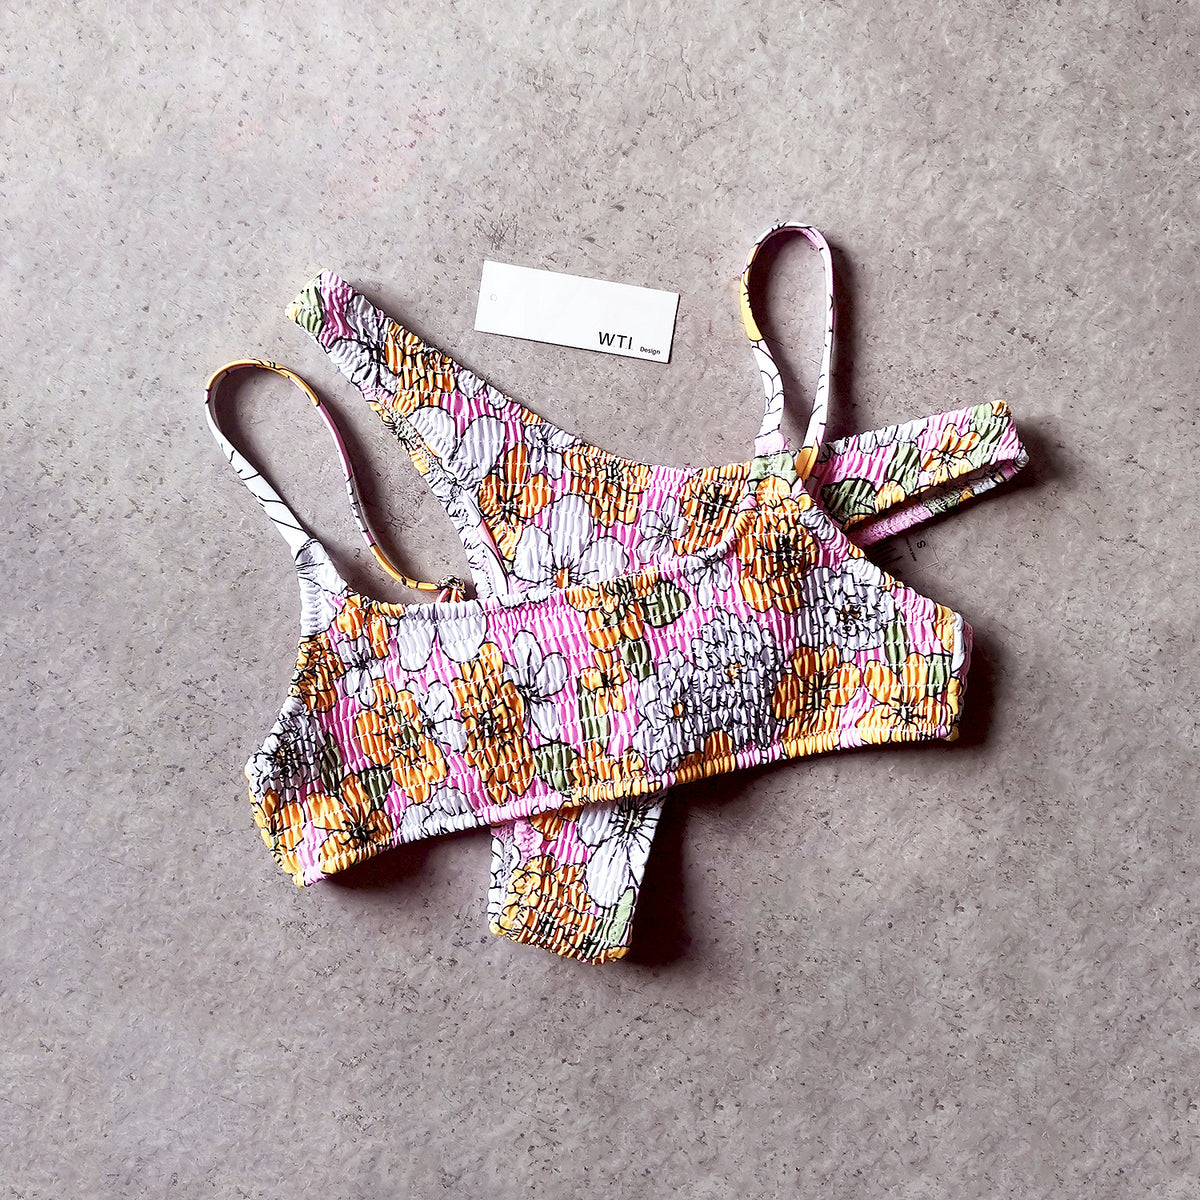 Floral Scrunched Crop Top Bikini Swimsuit SY208